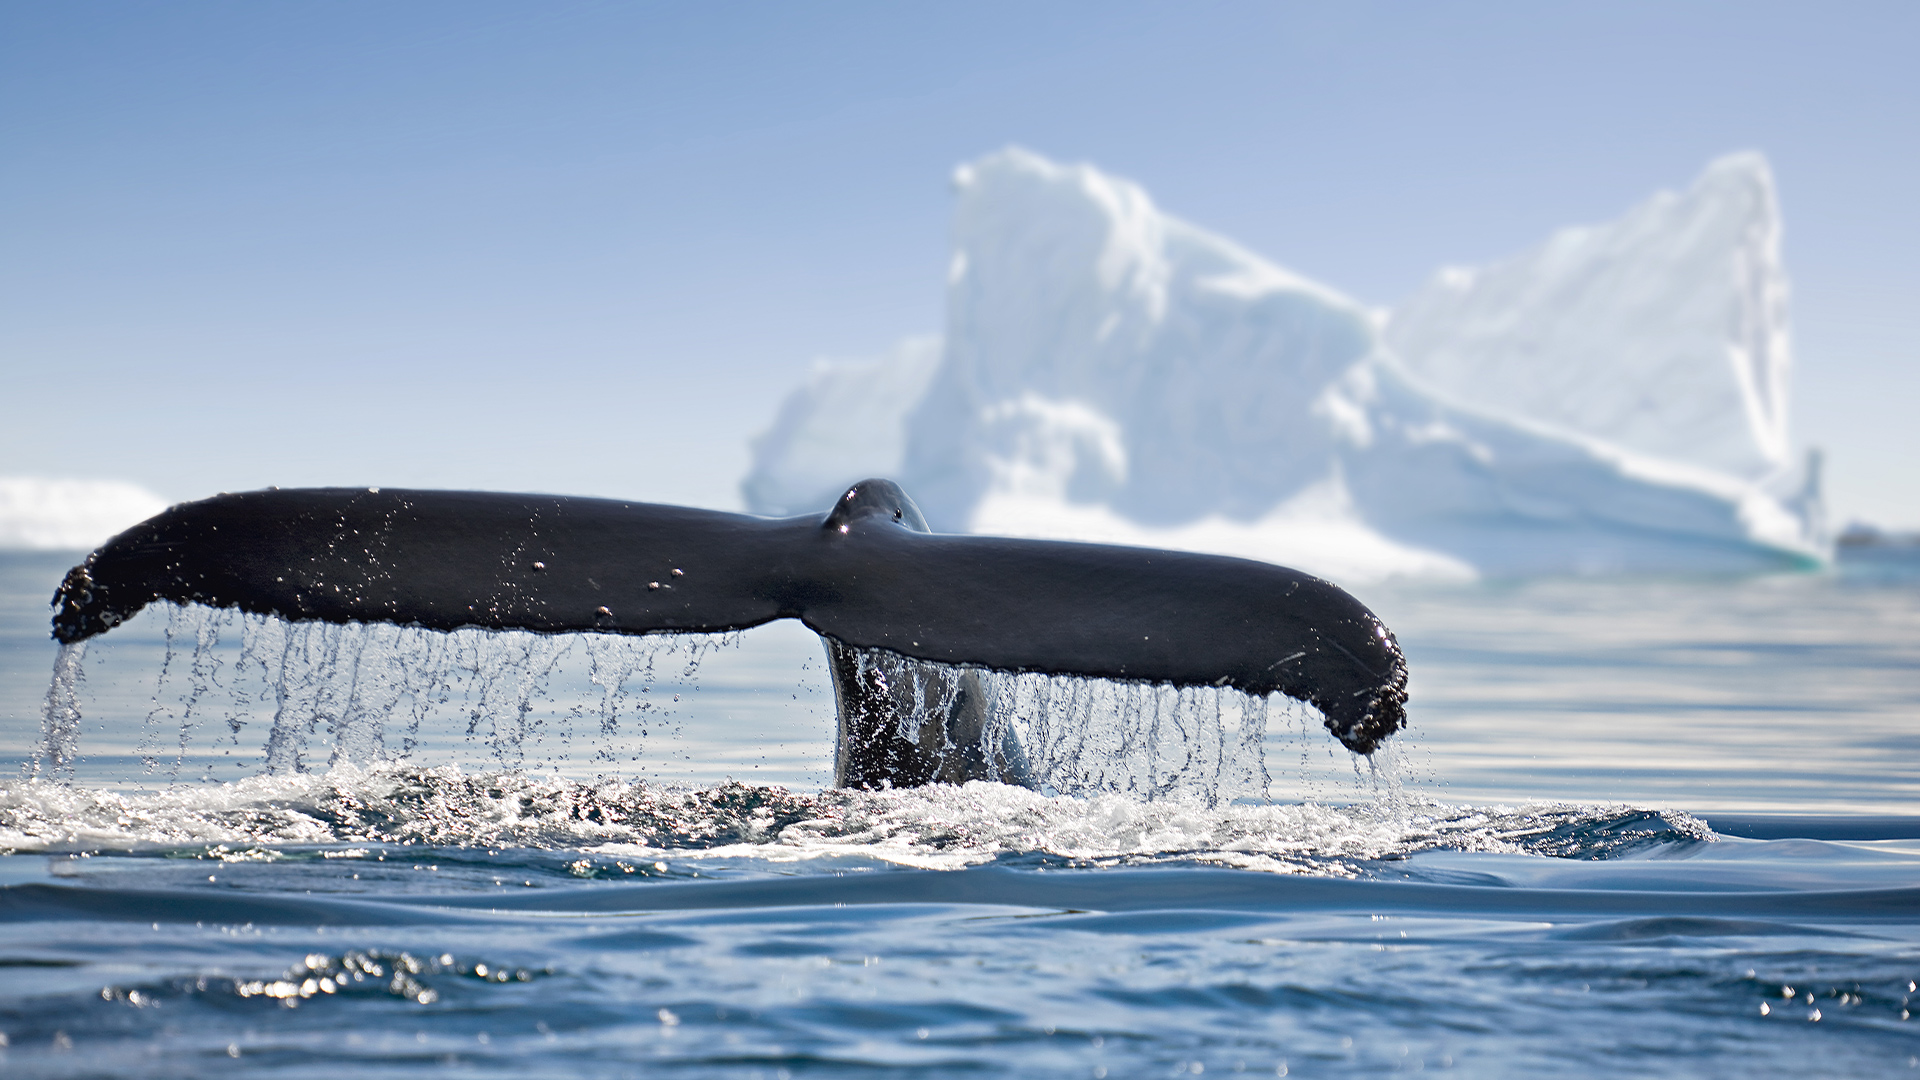 Destinations: Whale tail splashing above the icy waters in Antarctica